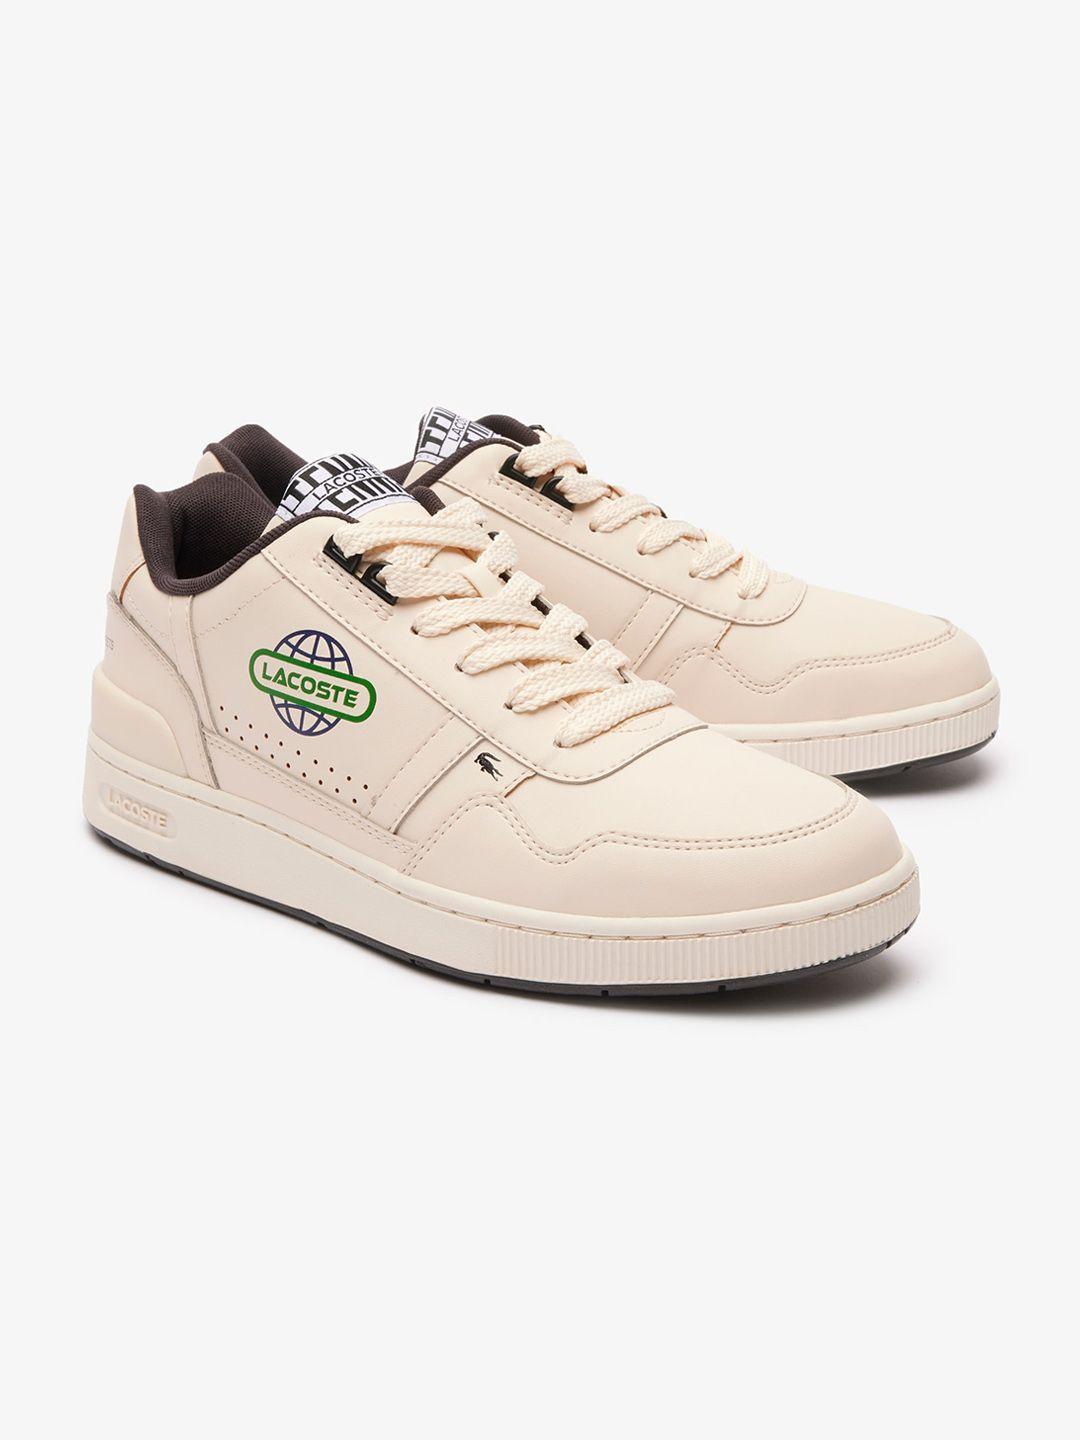 lacoste-men-printed-leather-comfort-insole-basics-sneakers